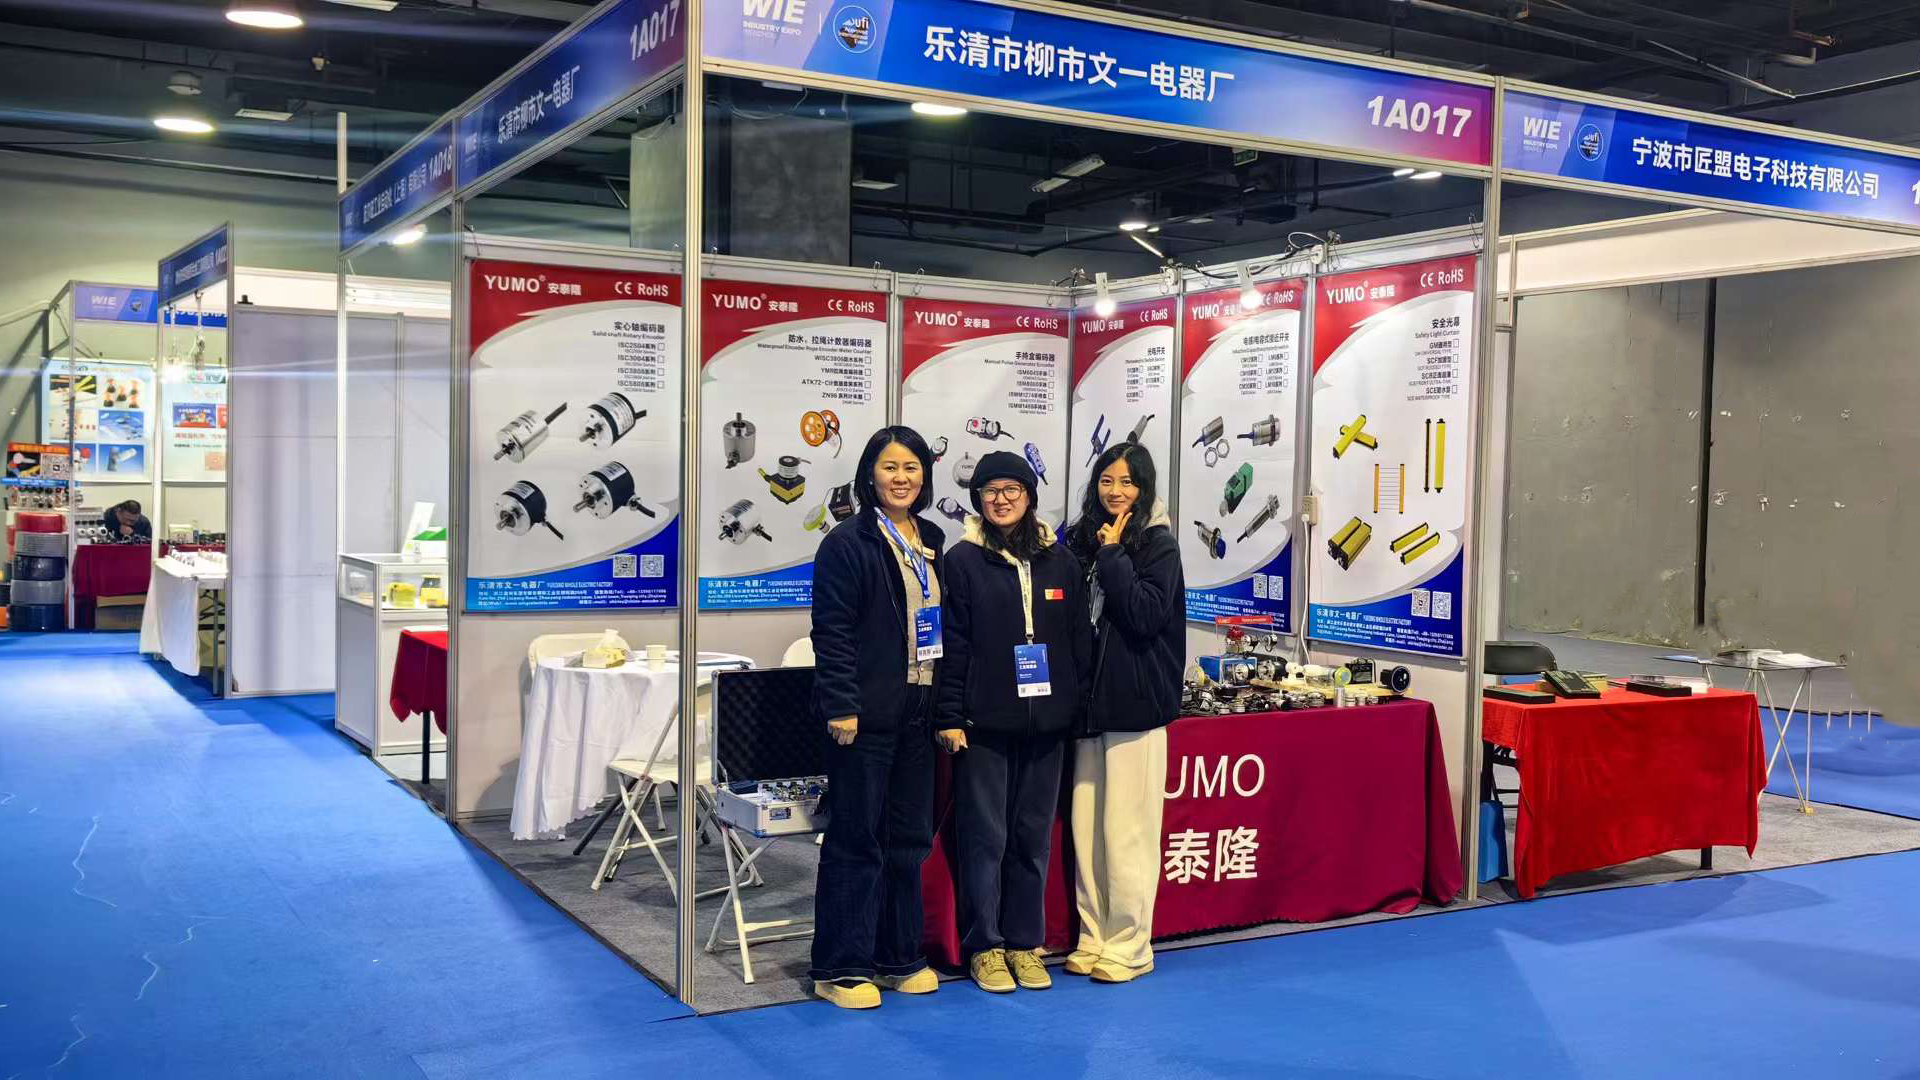 YUMO in Wenzhou Automation Expo